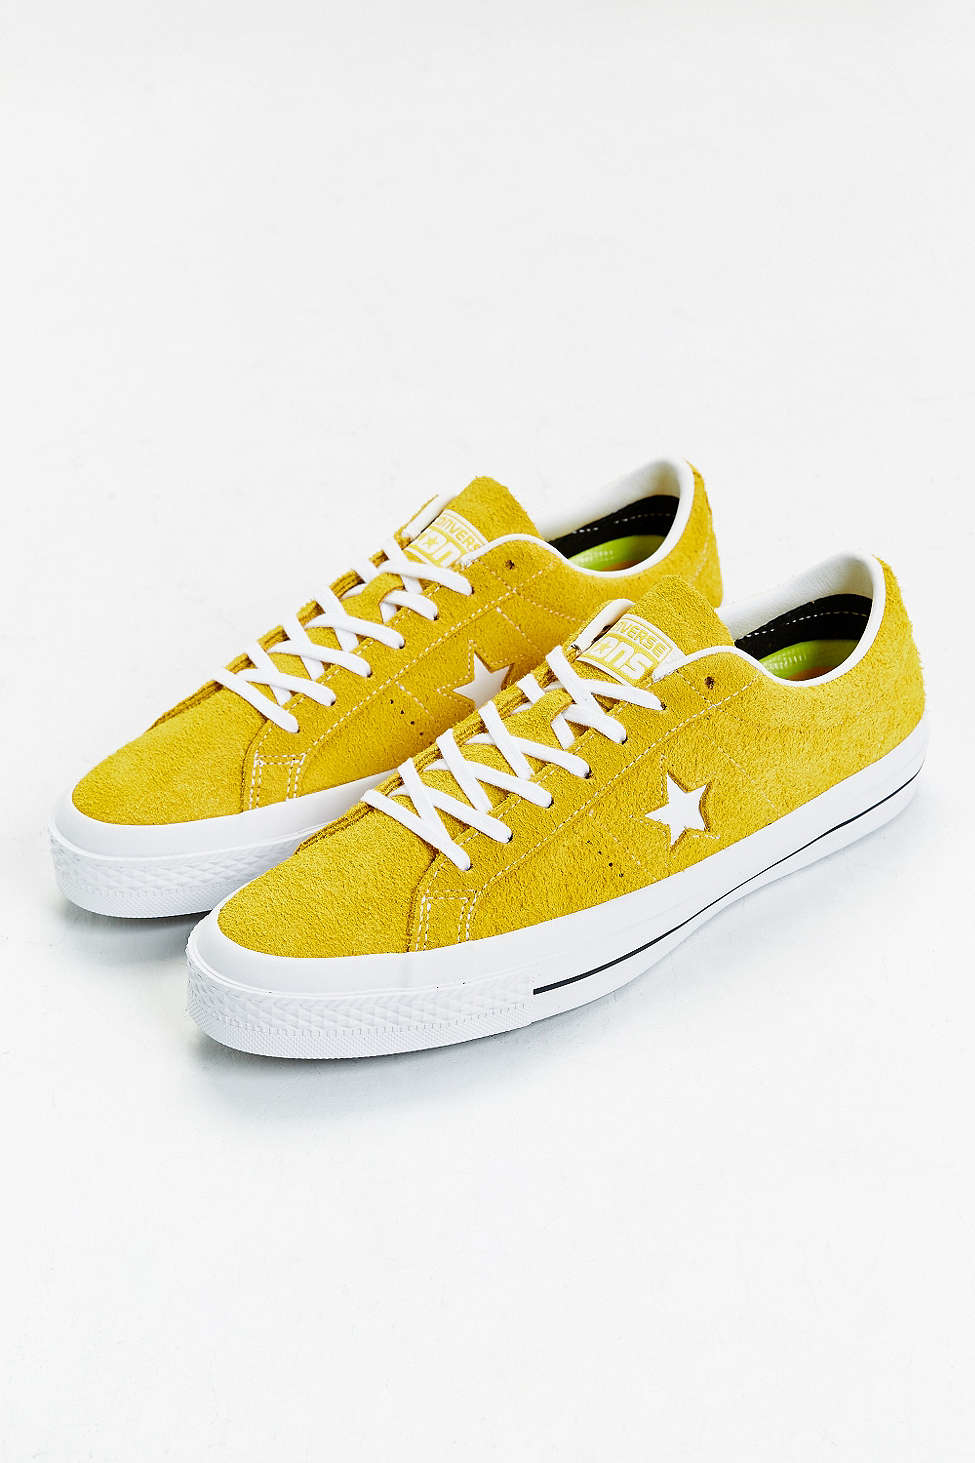 converse one star pro ox yellow, OFF 70 